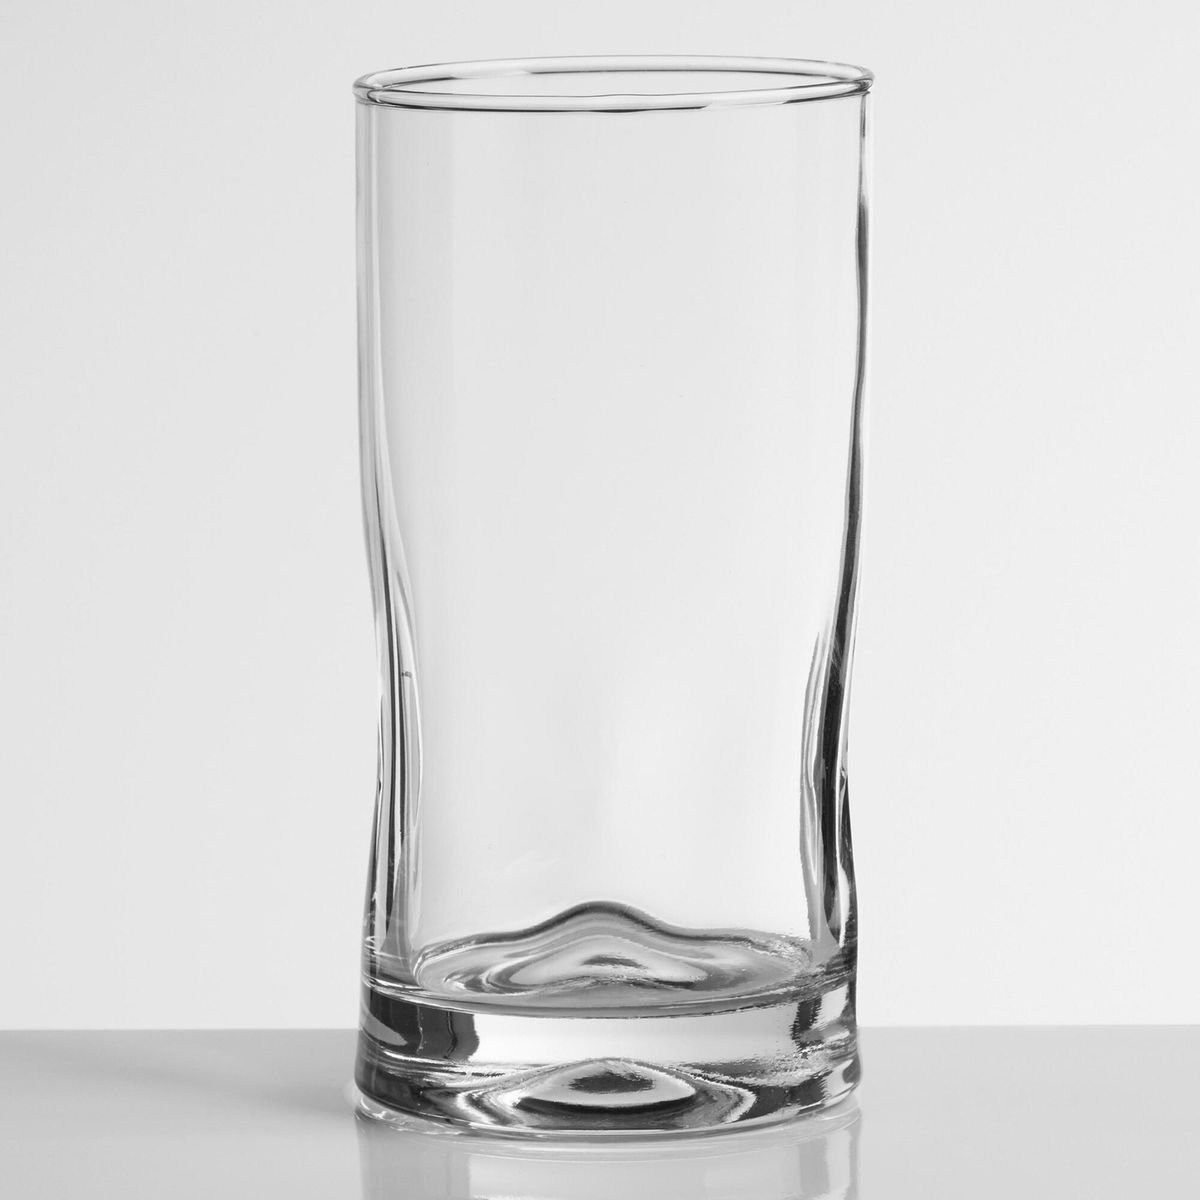 What do the numbers on a pint glass mean